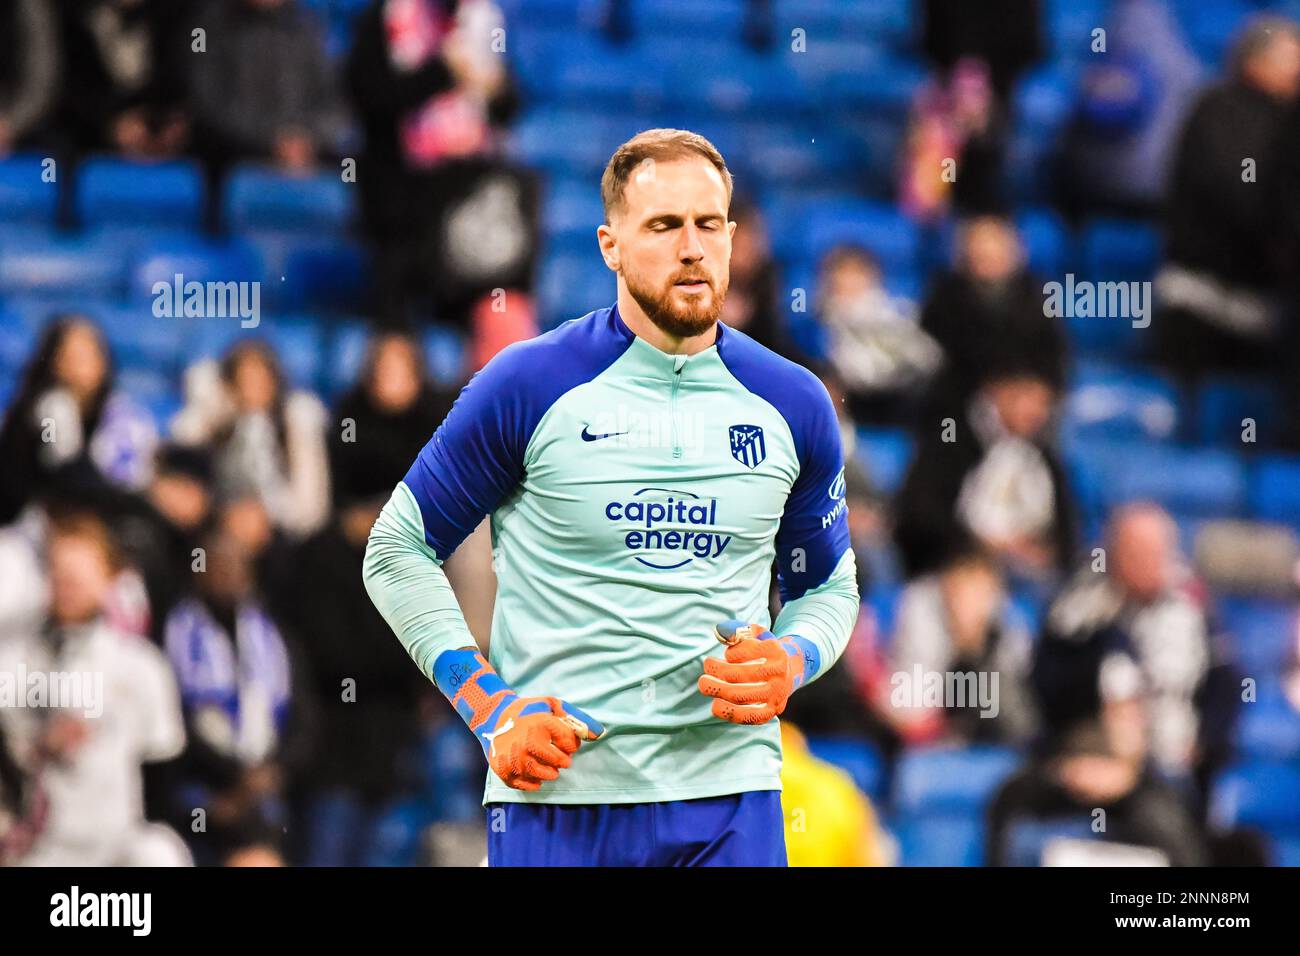 MADRID, SPAIN - FEBRUARY 25: Jan Oblak of Atletico de Madrid CF in the warm up of the match between Real Madrid CF and Atletico de Madrid CF of La Liga Santander on February 25, 2022 at Santiago Bernabeu of Madrid, Spain. (Photo by Samuel Carreño/ PX Images) Stock Photo